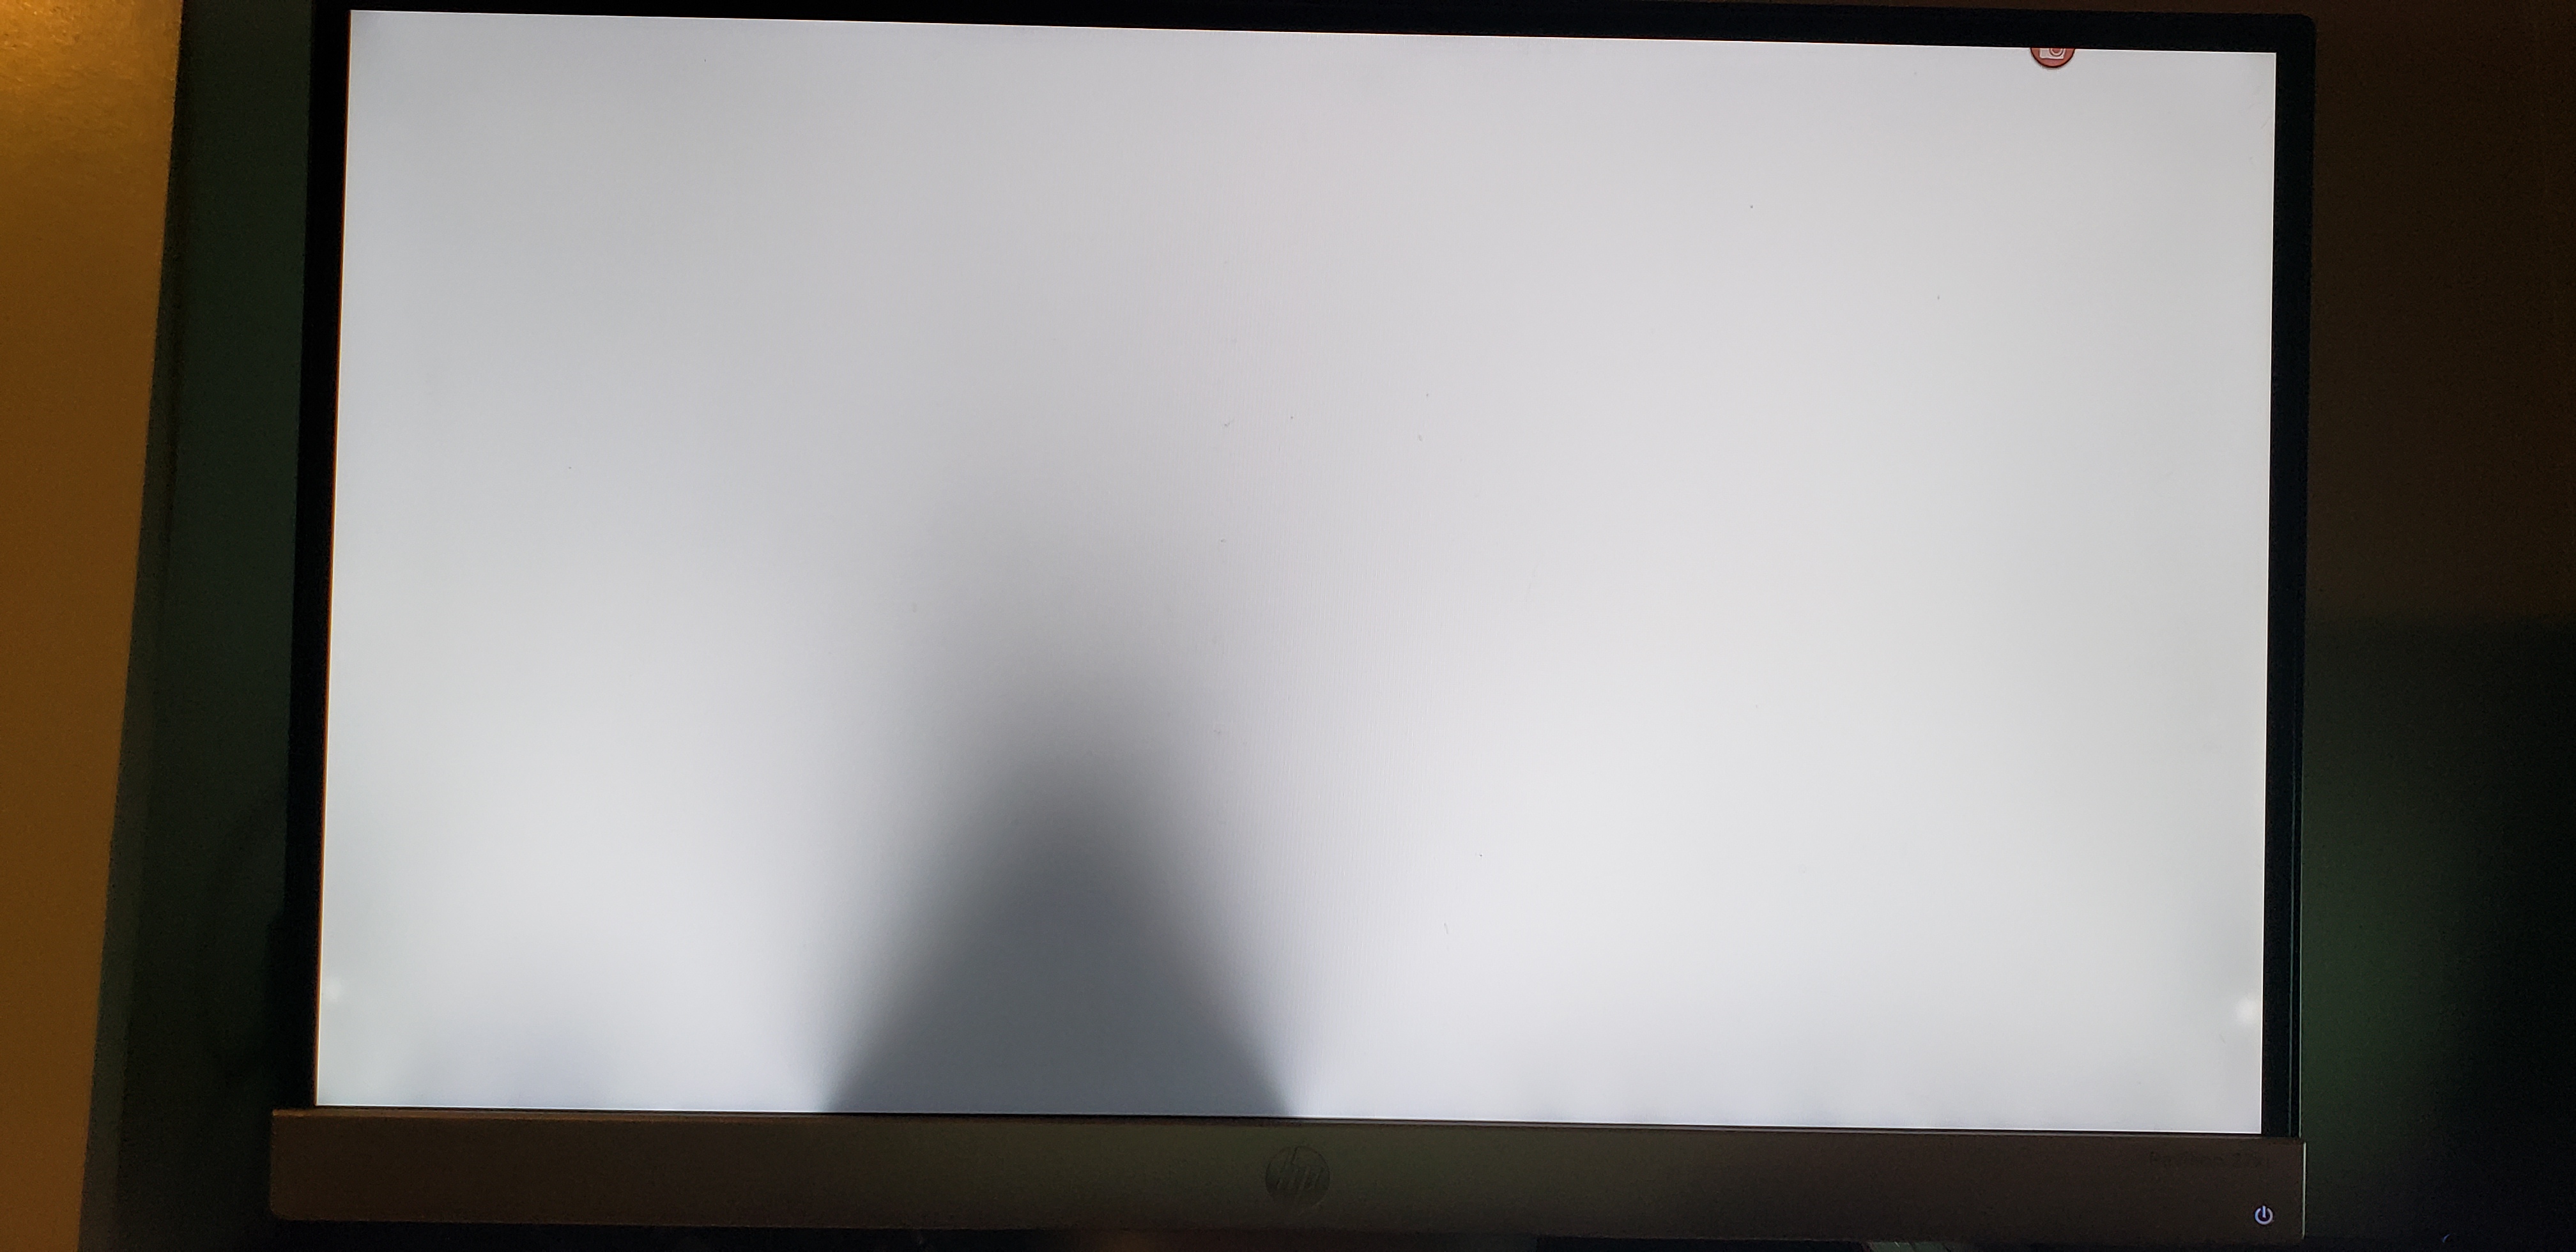 HP Pavilion 23xi IPS LED Backlit Monitor has dark shadow in ... - HP  Support Community - 7125144